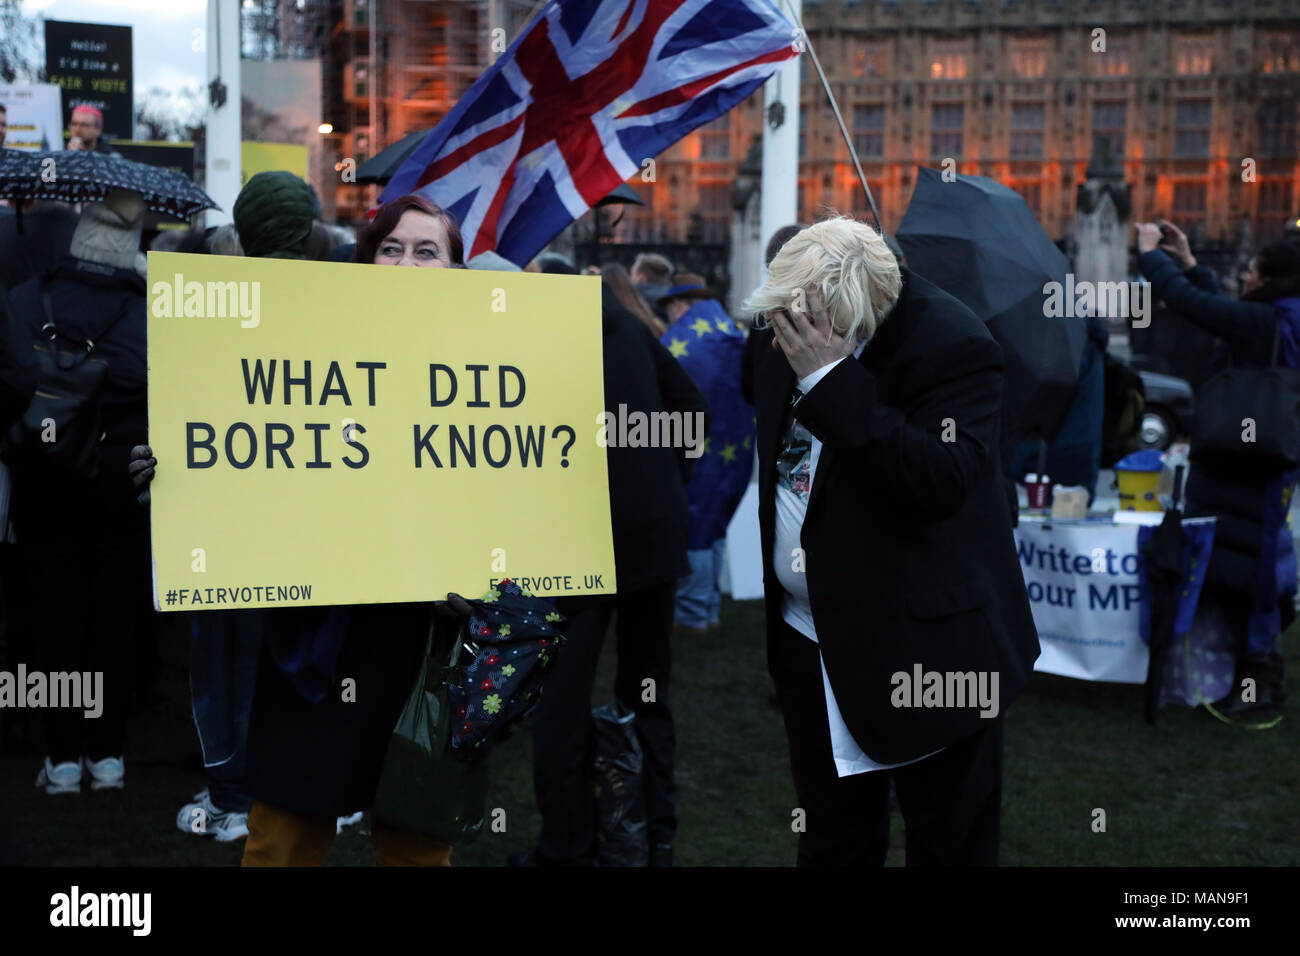 Drew Galdron, an impersonator of British Foreign Secretary Boris Johnson, at the Fair Vote rally in Parliament Square, London on 29 March, 2018 Stock Photo